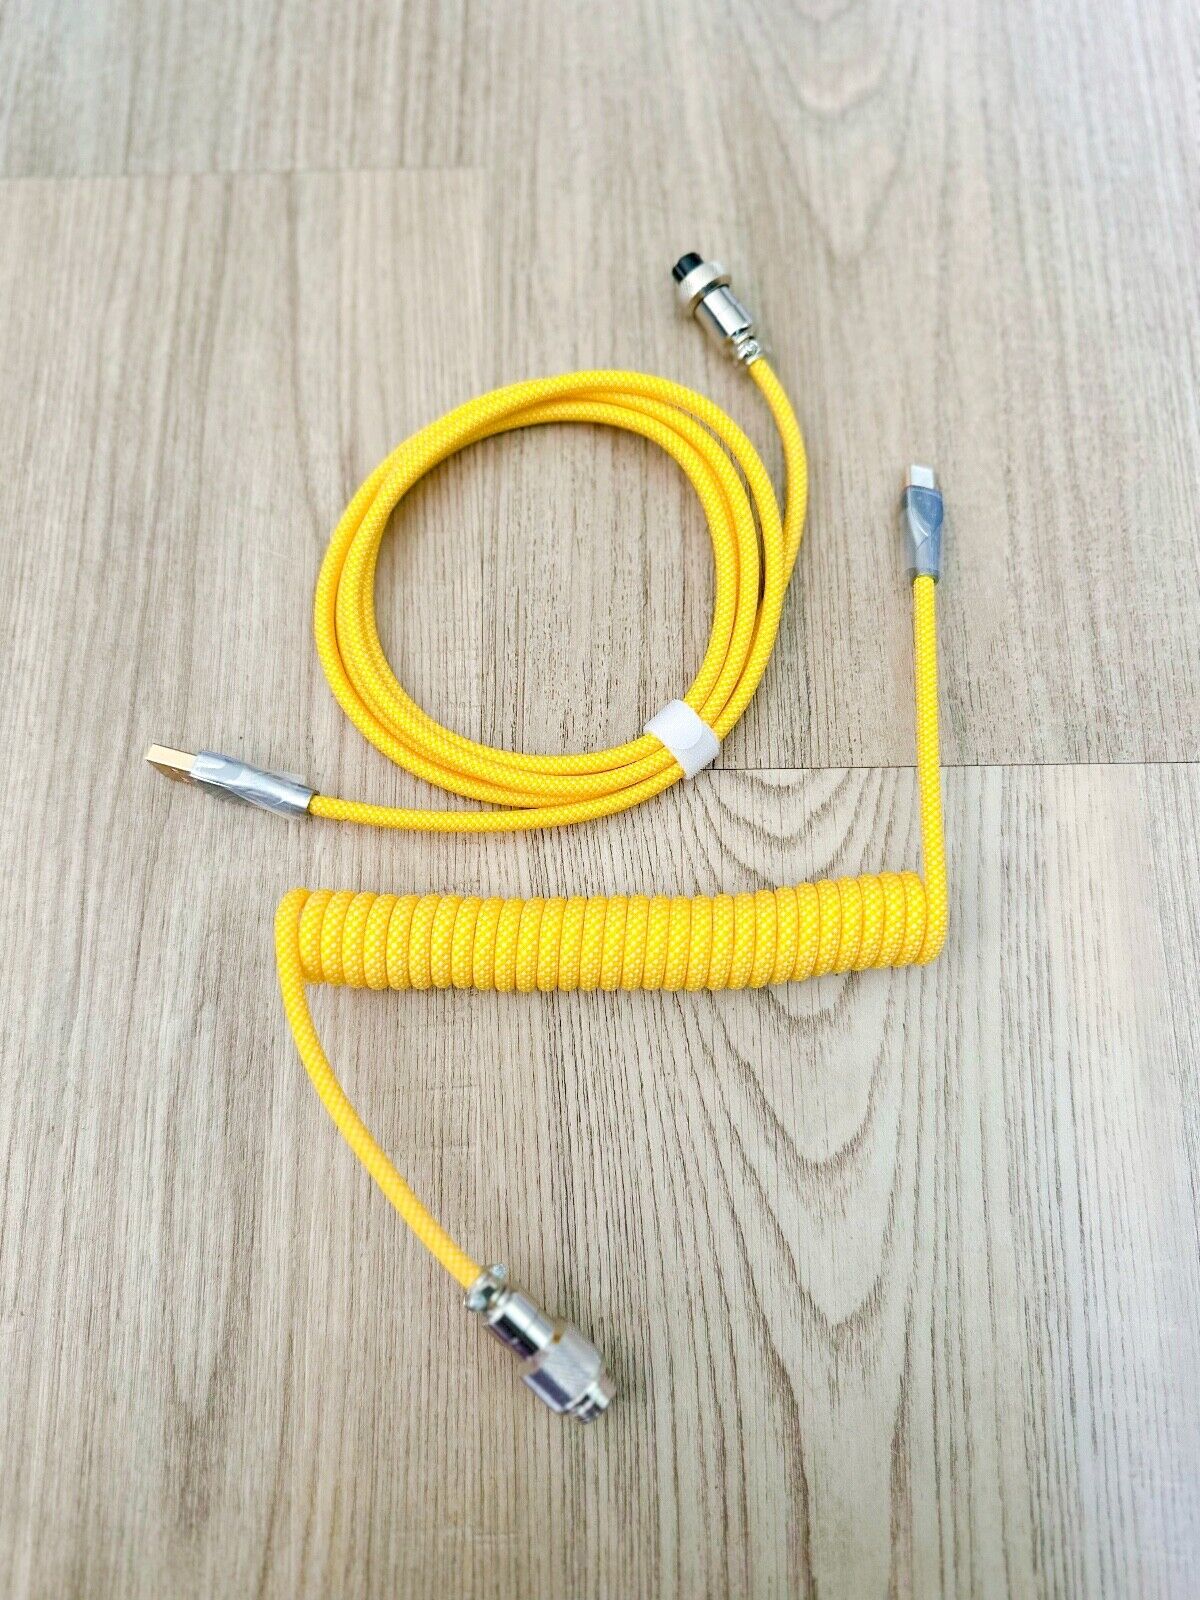 Custom Coiled Aviator Cable USB-C Mechanical PC Gaming Keyboard Cable